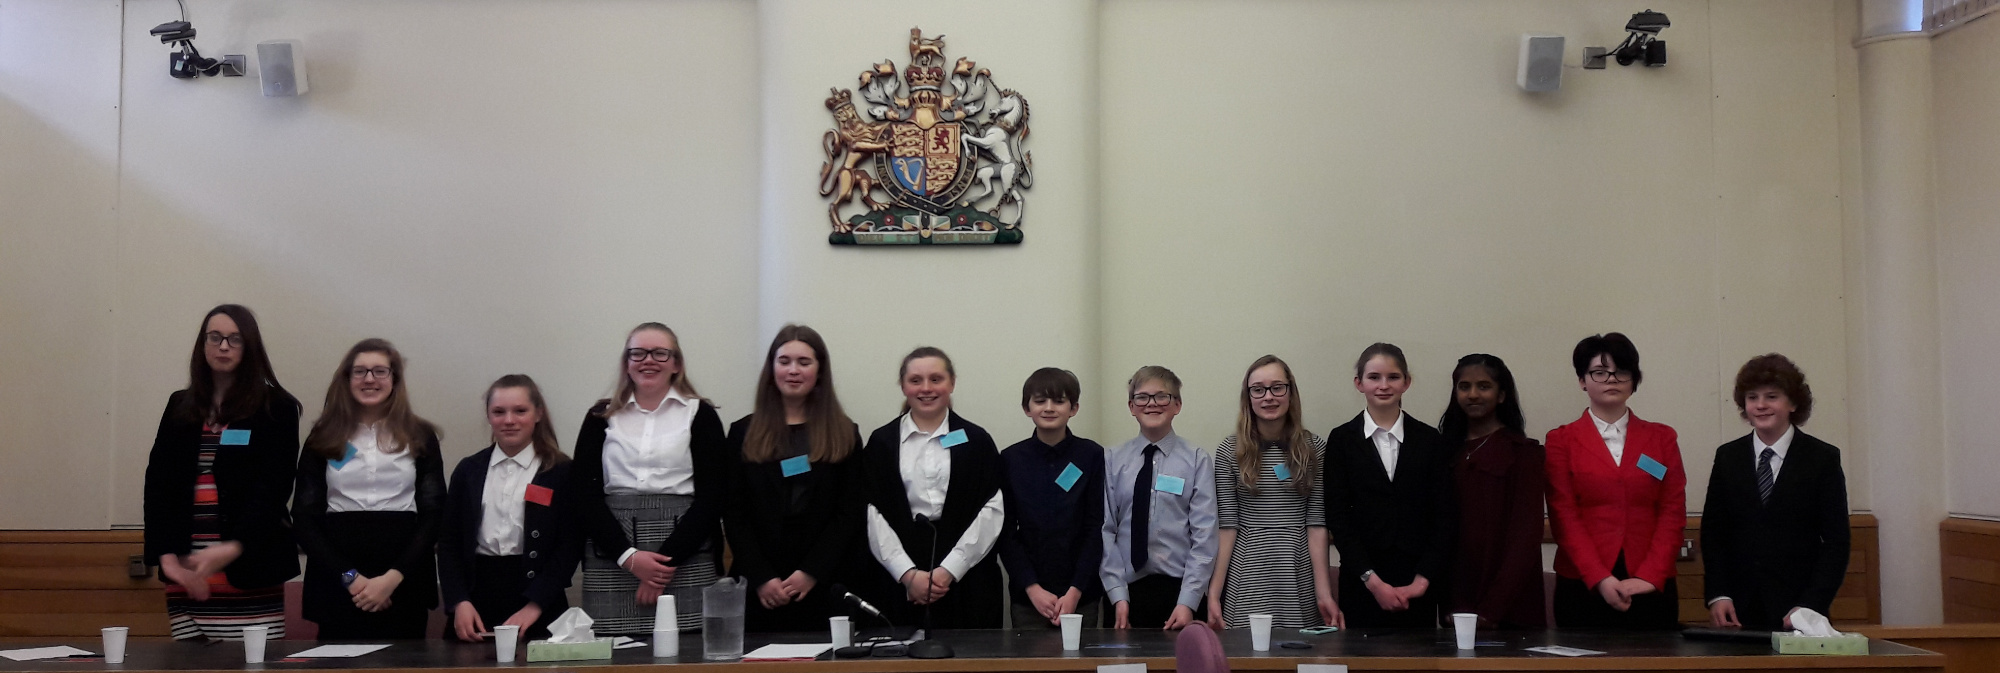 year 9 magistrates court mock trial competition 2018